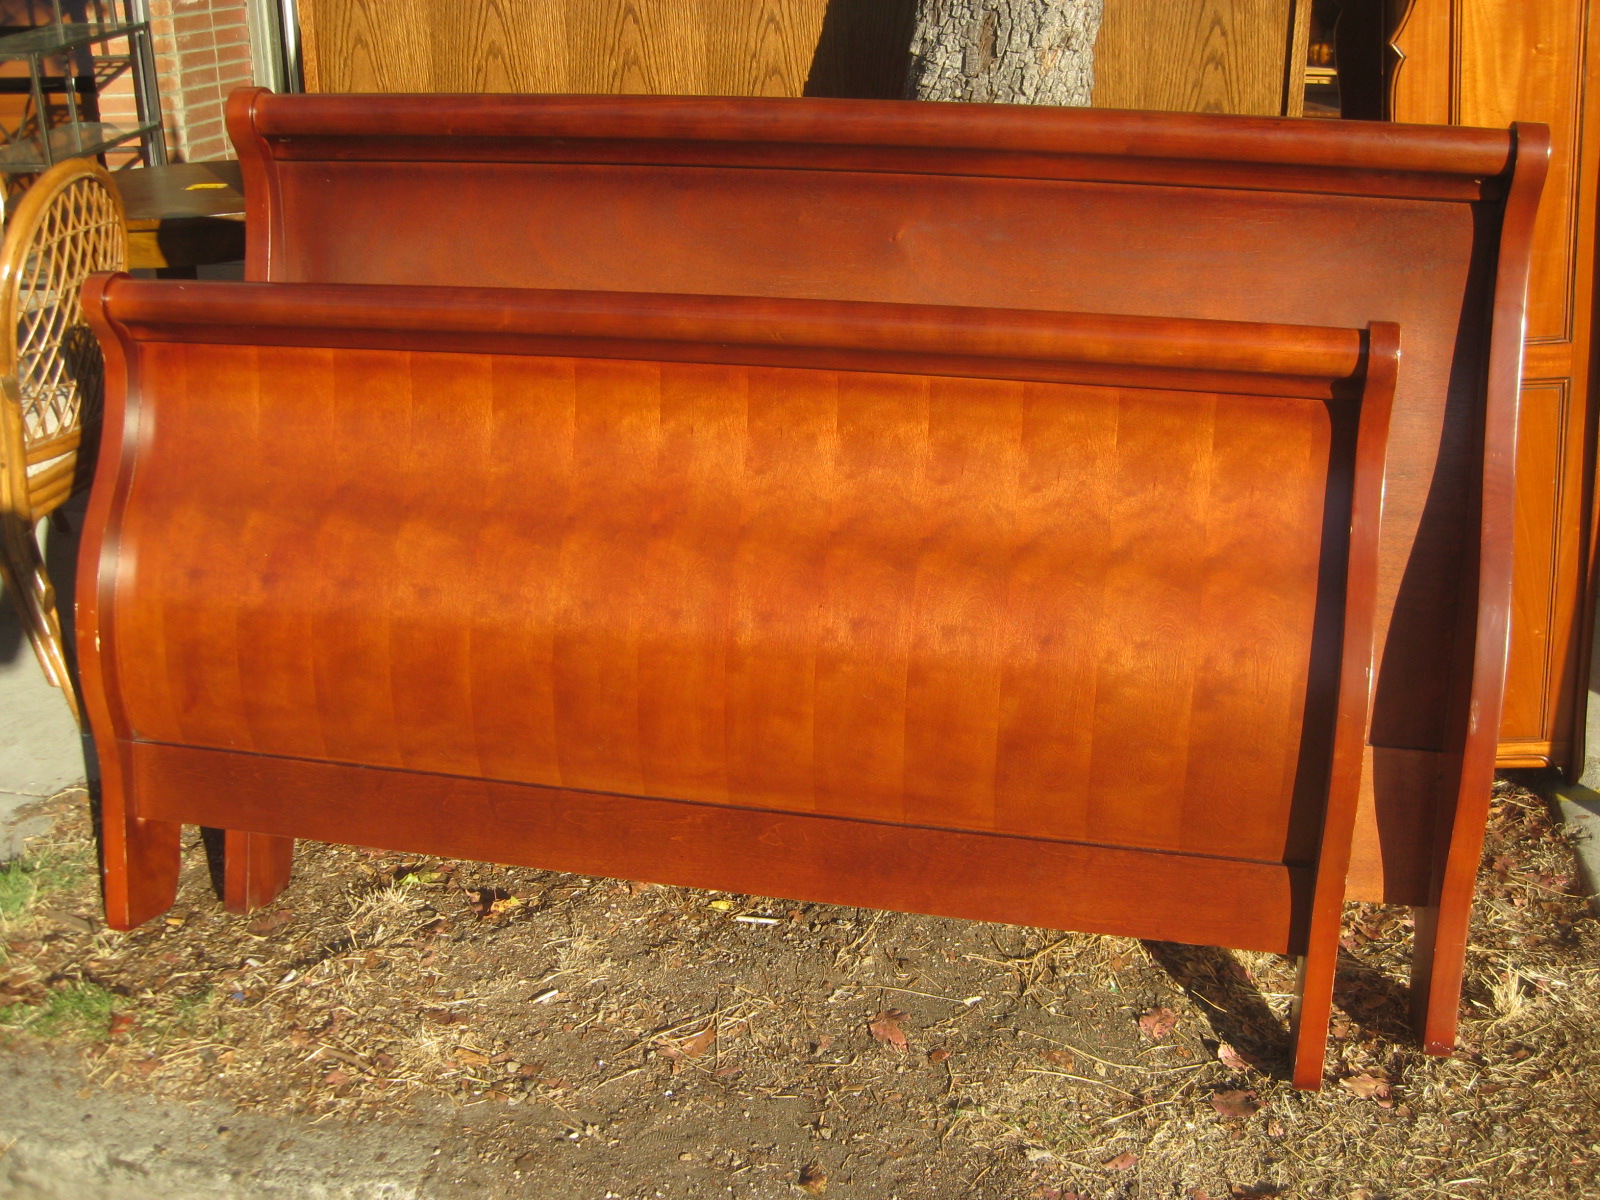 UHURU FURNITURE & COLLECTIBLES: SOLD - Queen Sleigh Bed Frame